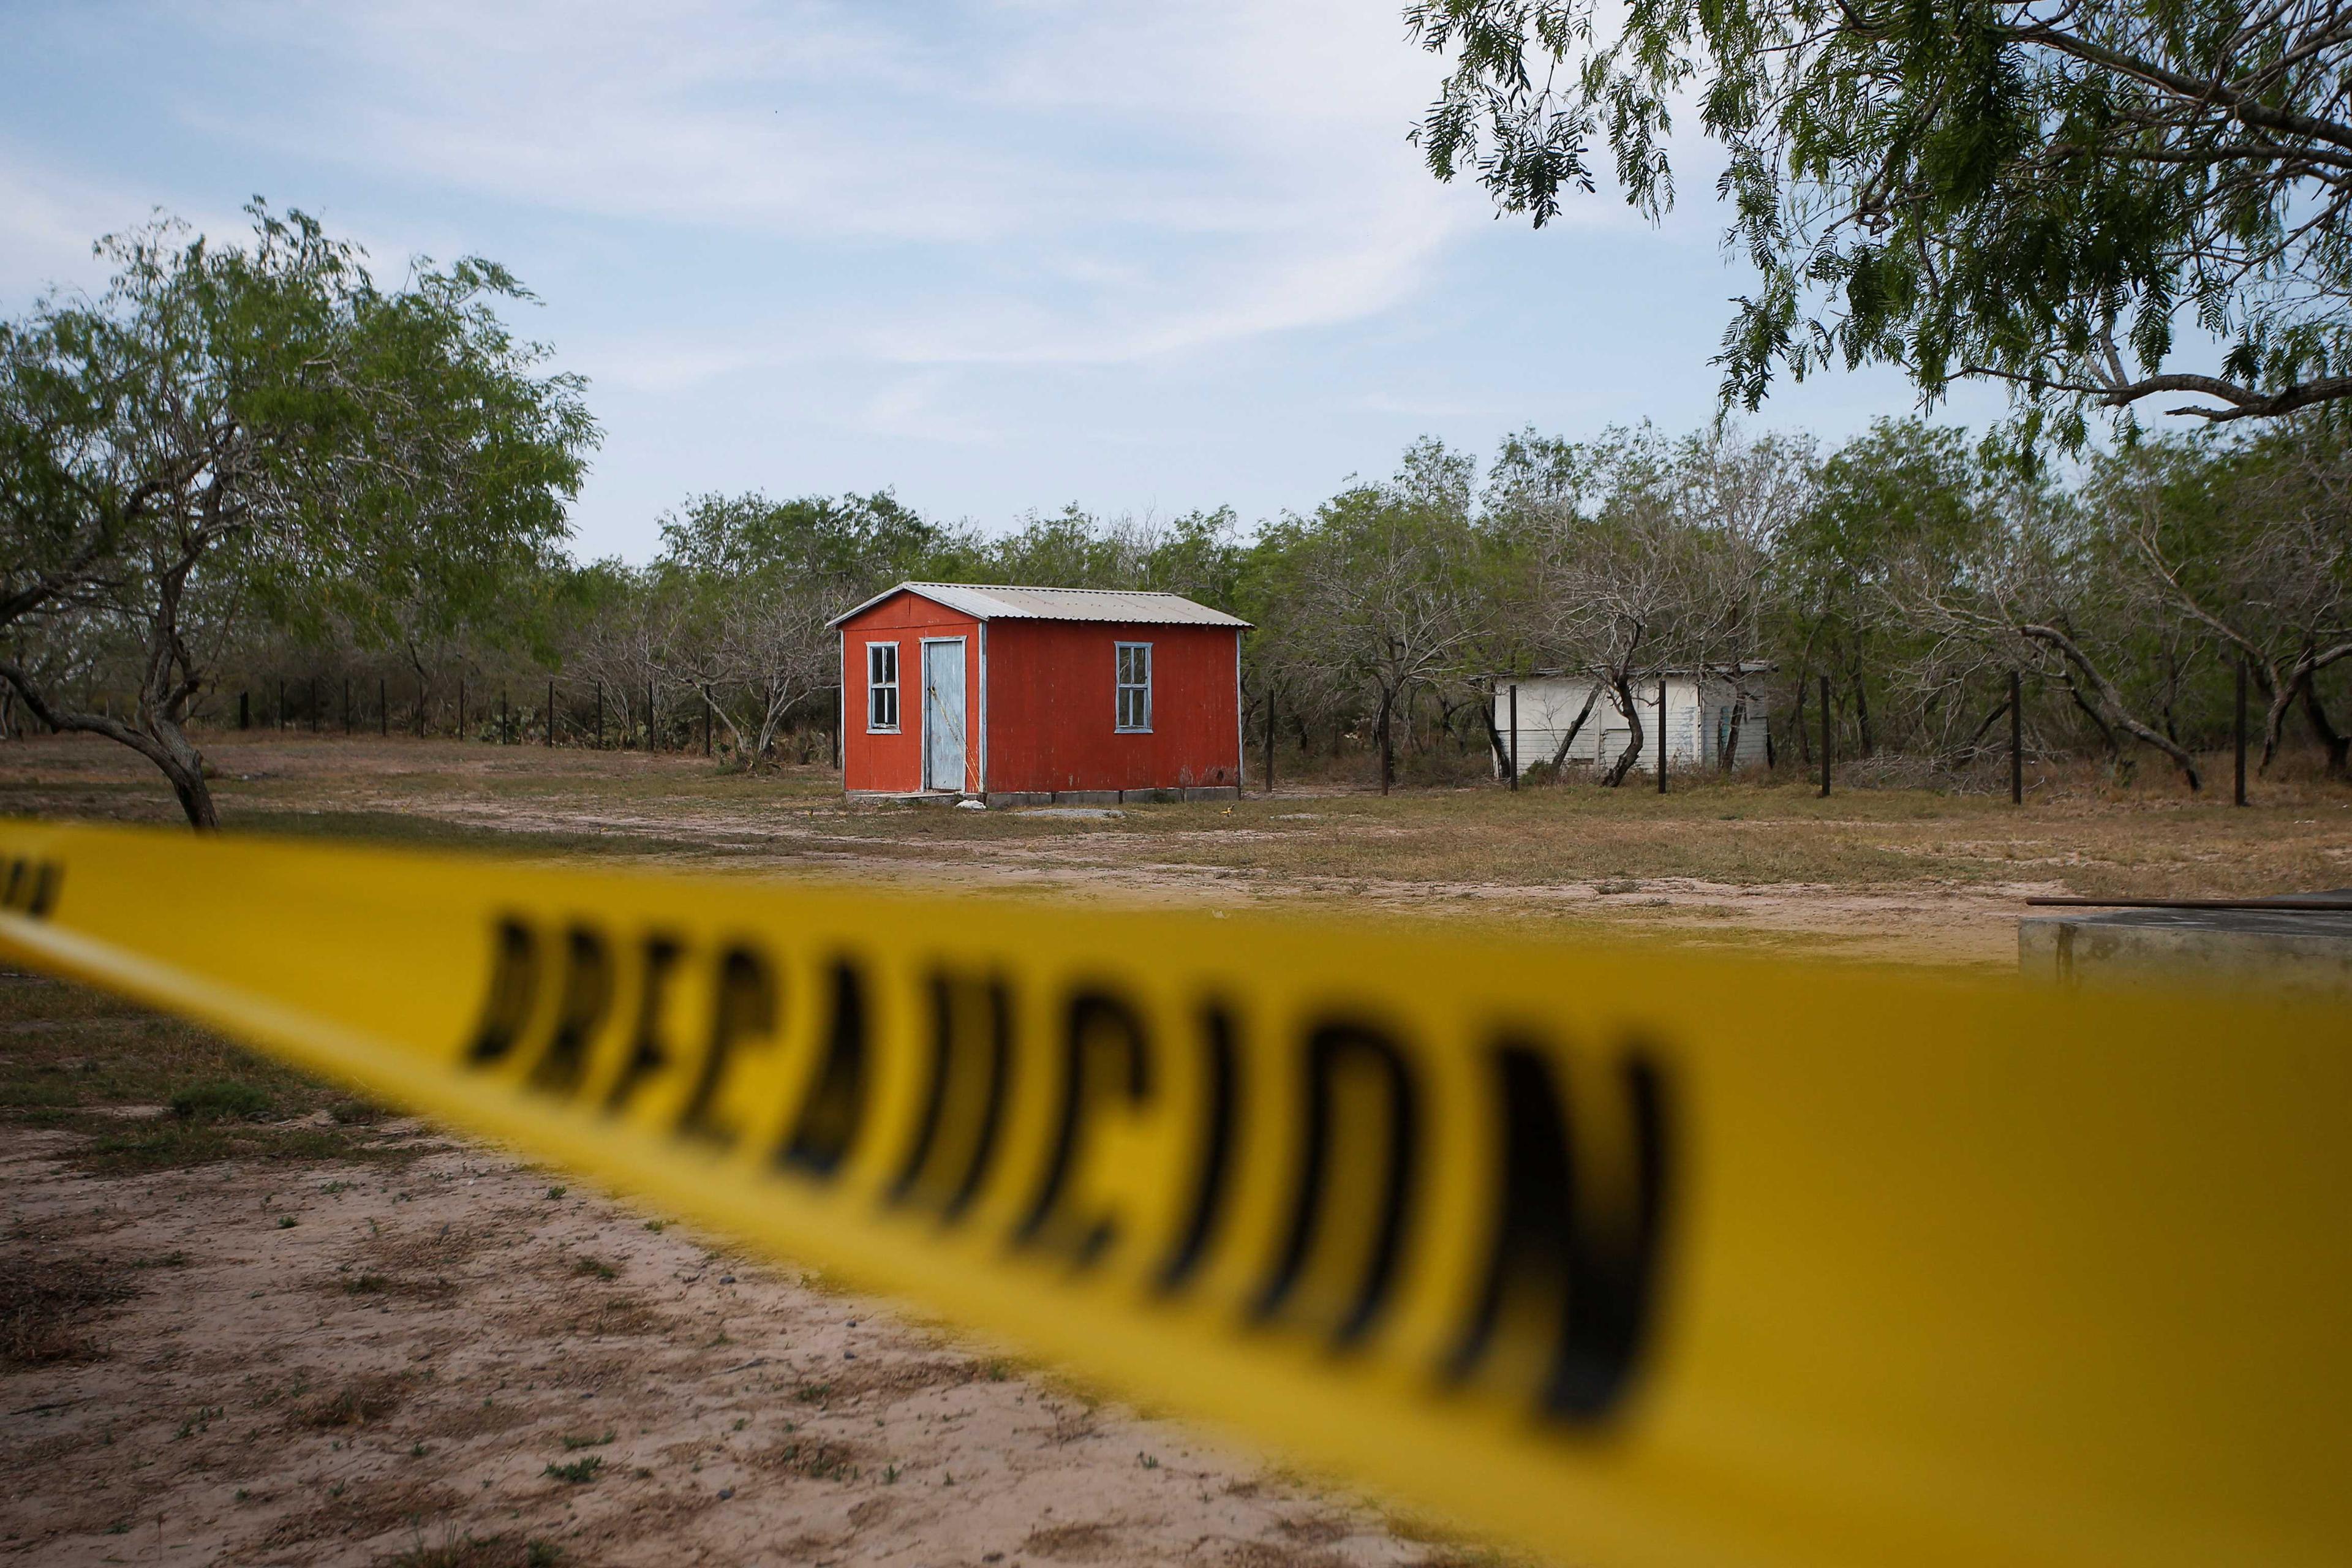 A general view of a storage shed behind a police cordon, at the scene where authorities found the bodies of two of four Americans kidnapped by gunmen, in Matamoros, Mexico March 7. Photo: Reuters